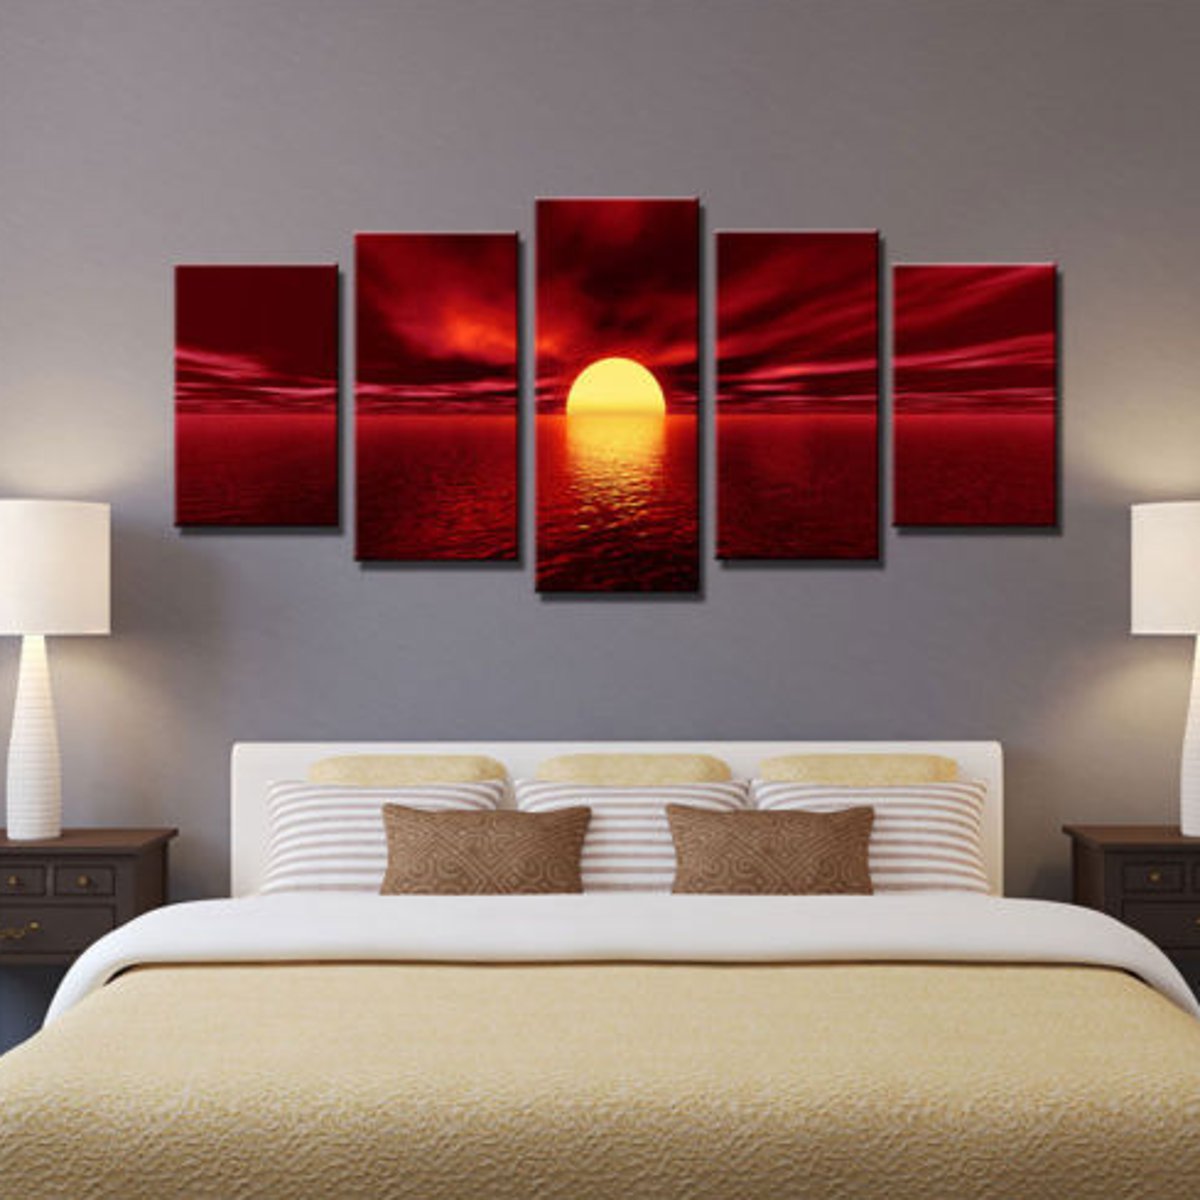 5Pcs-Wall-Decorative-Paintings-Canvas-Print-Art-Pictures-Frameless-Wall-Hanging-Decorations-for-Home-1720818-2